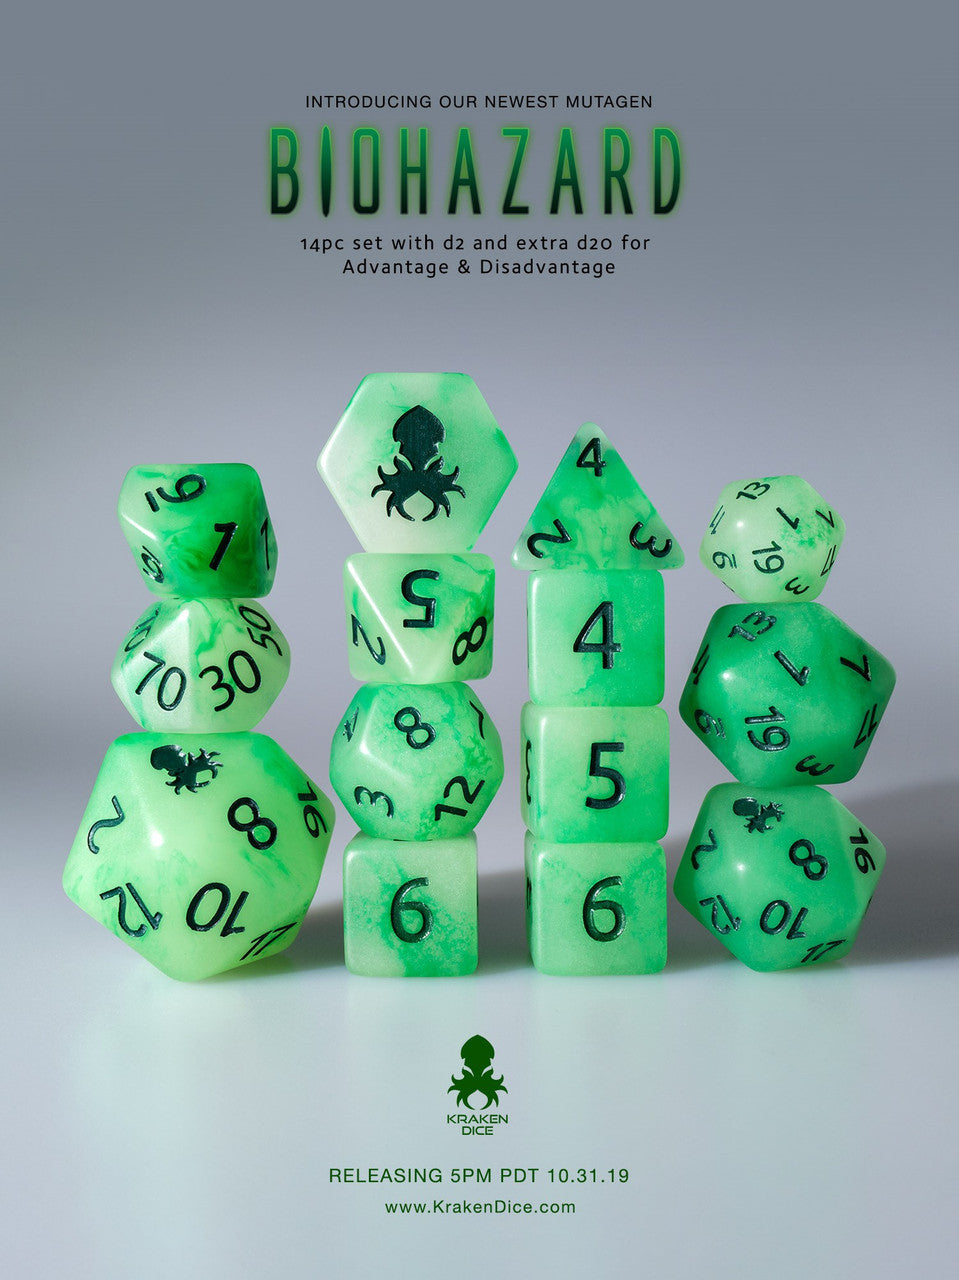 Biohazard Glow in the Dark 14pc Dice Set with Green Ink